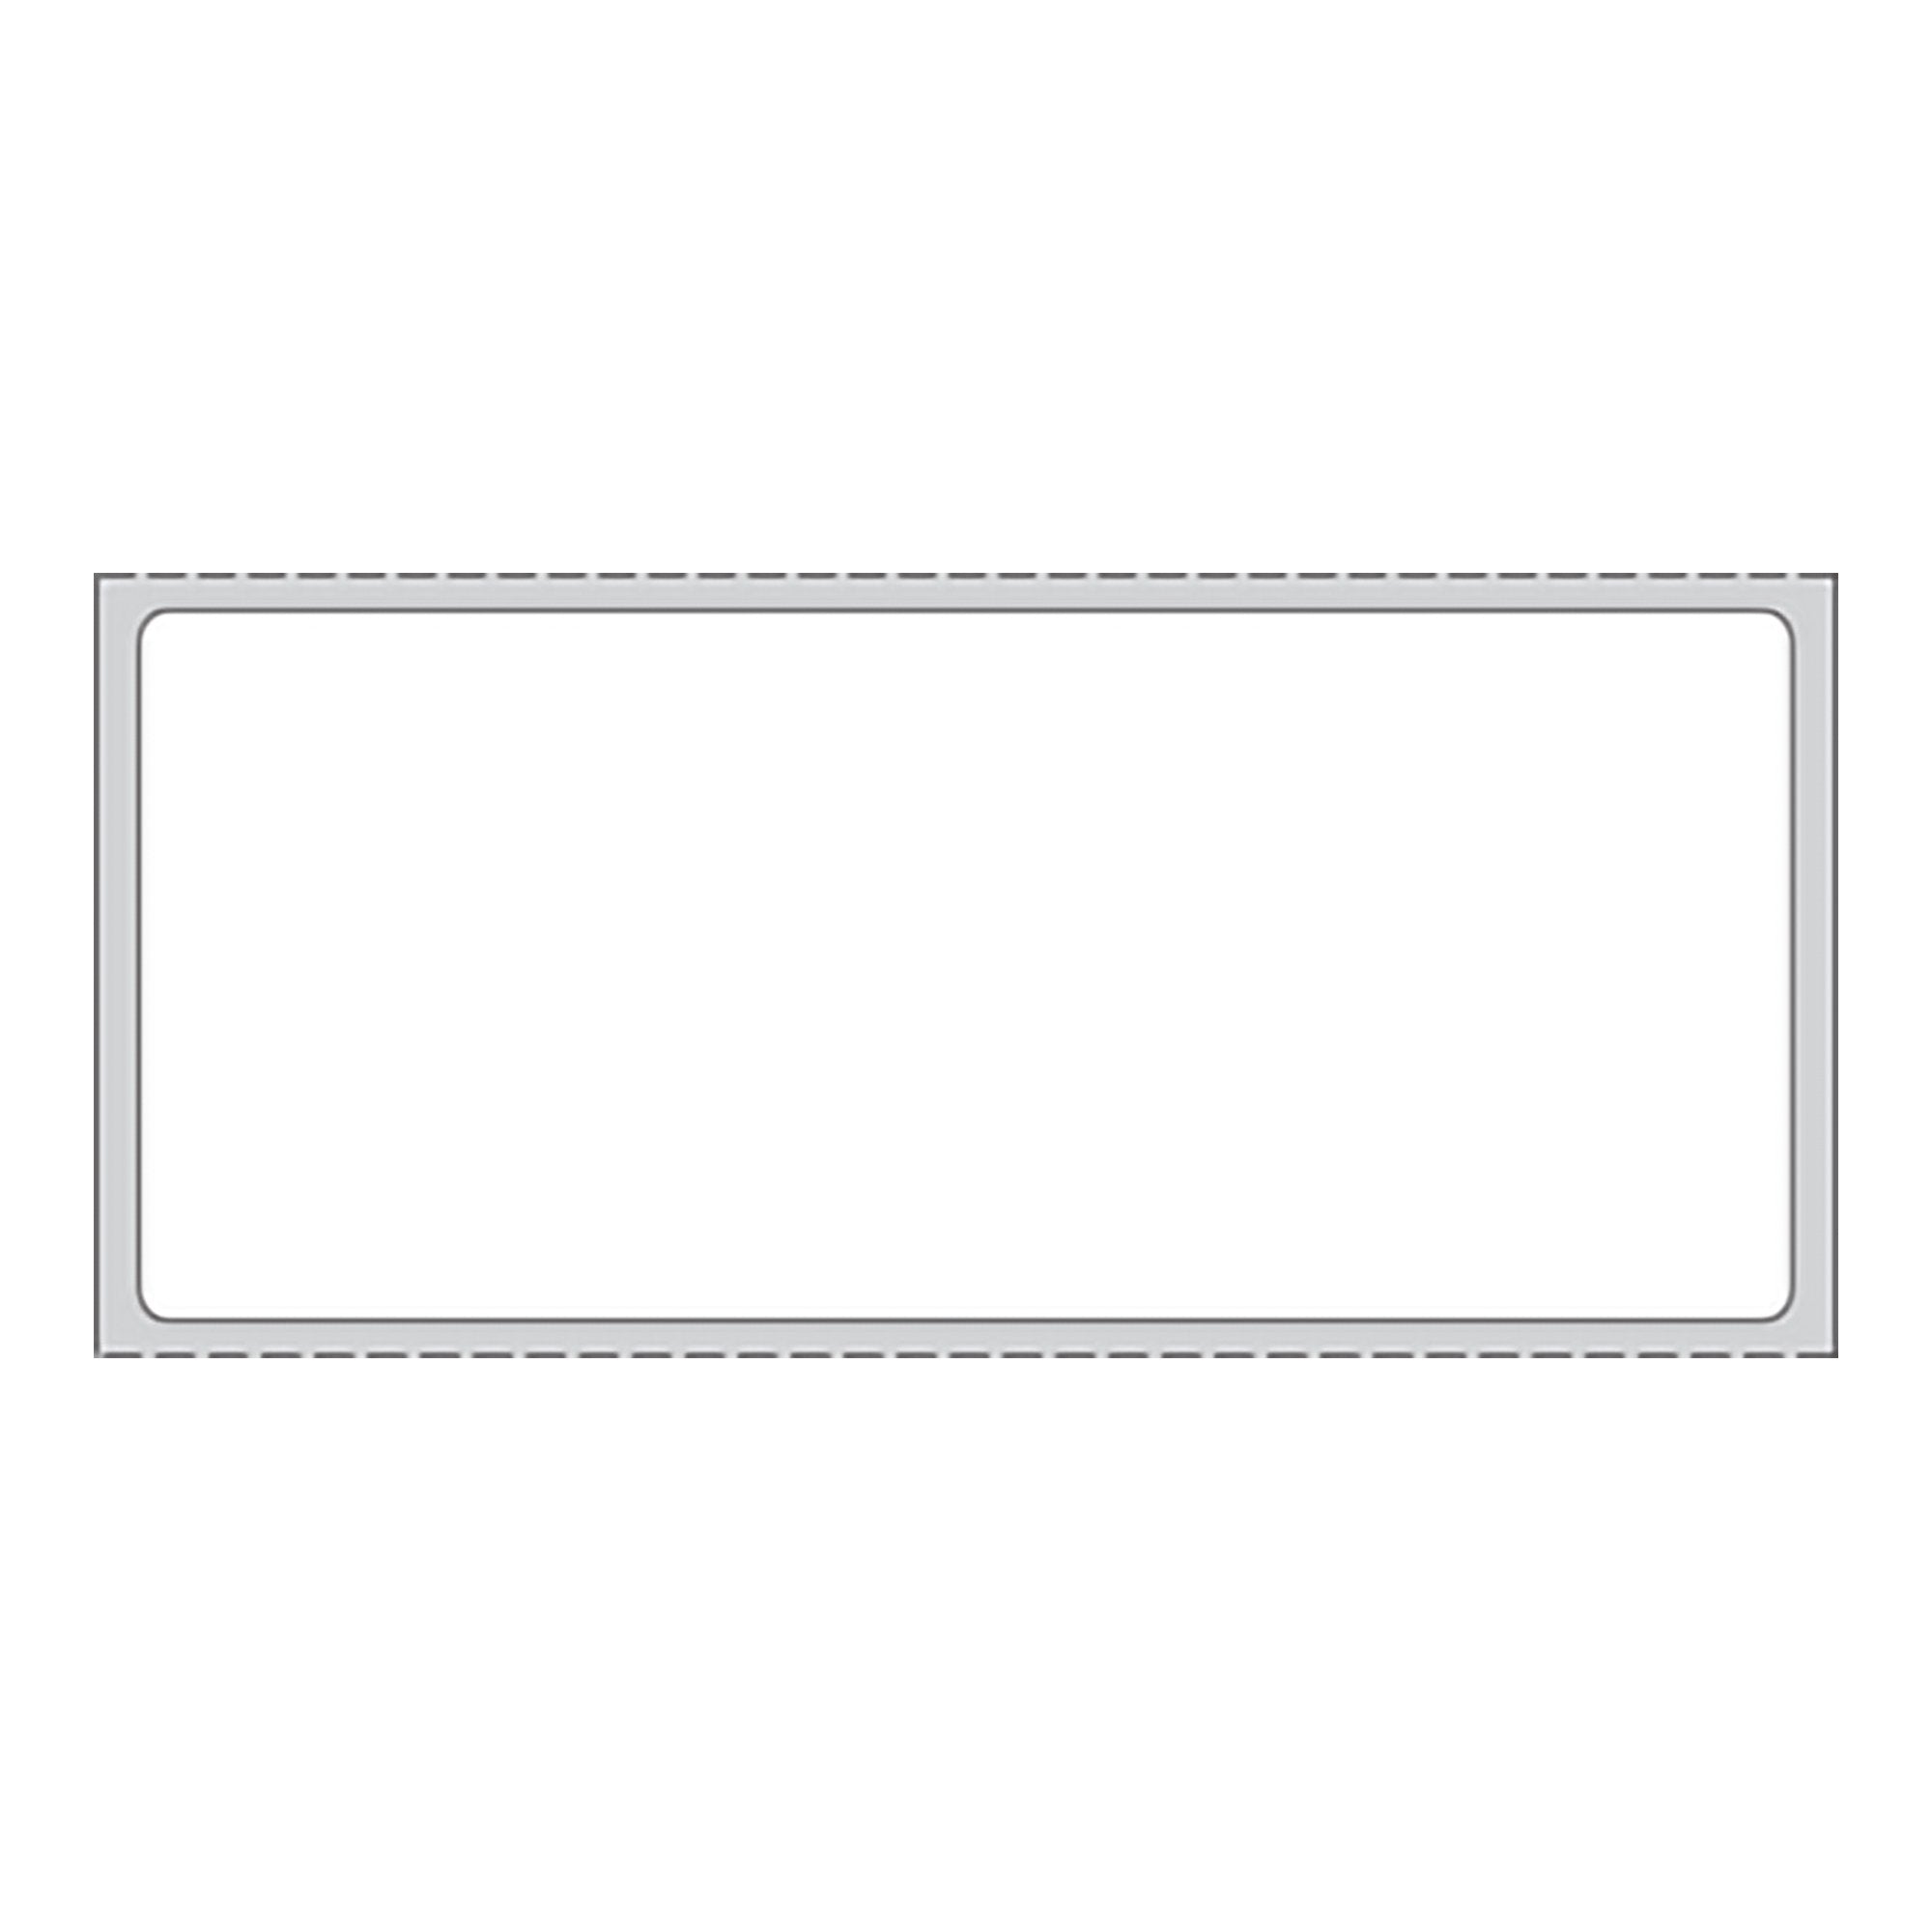 Blank Label pdc® Thermal Label White Paper 1-1/2 X 3-1/2 Inch